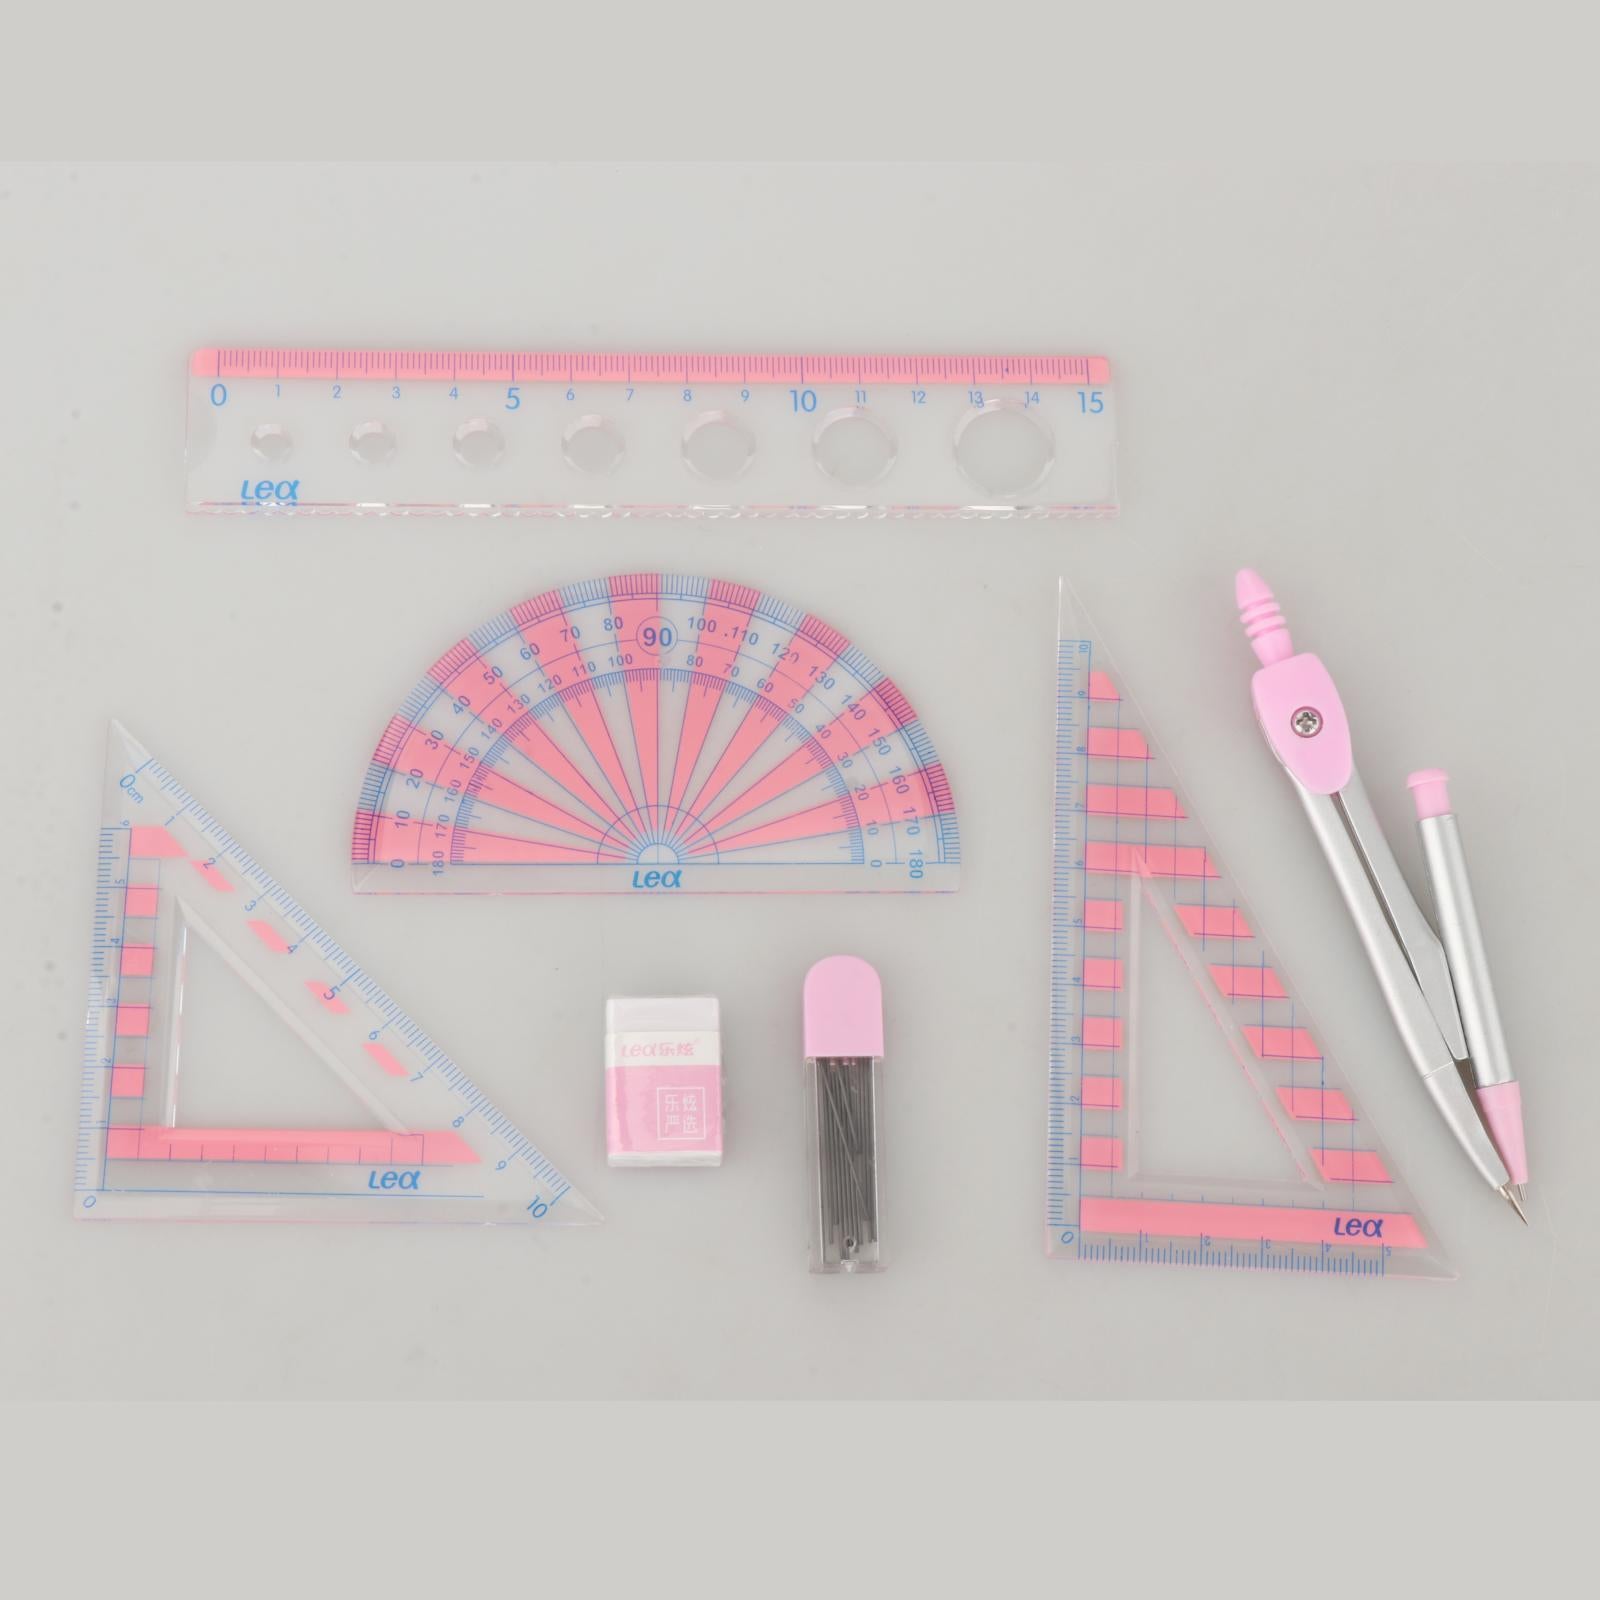 7x Mathematical Geometry Drawing Tool Student Stationery Rulers Gifts  Pink